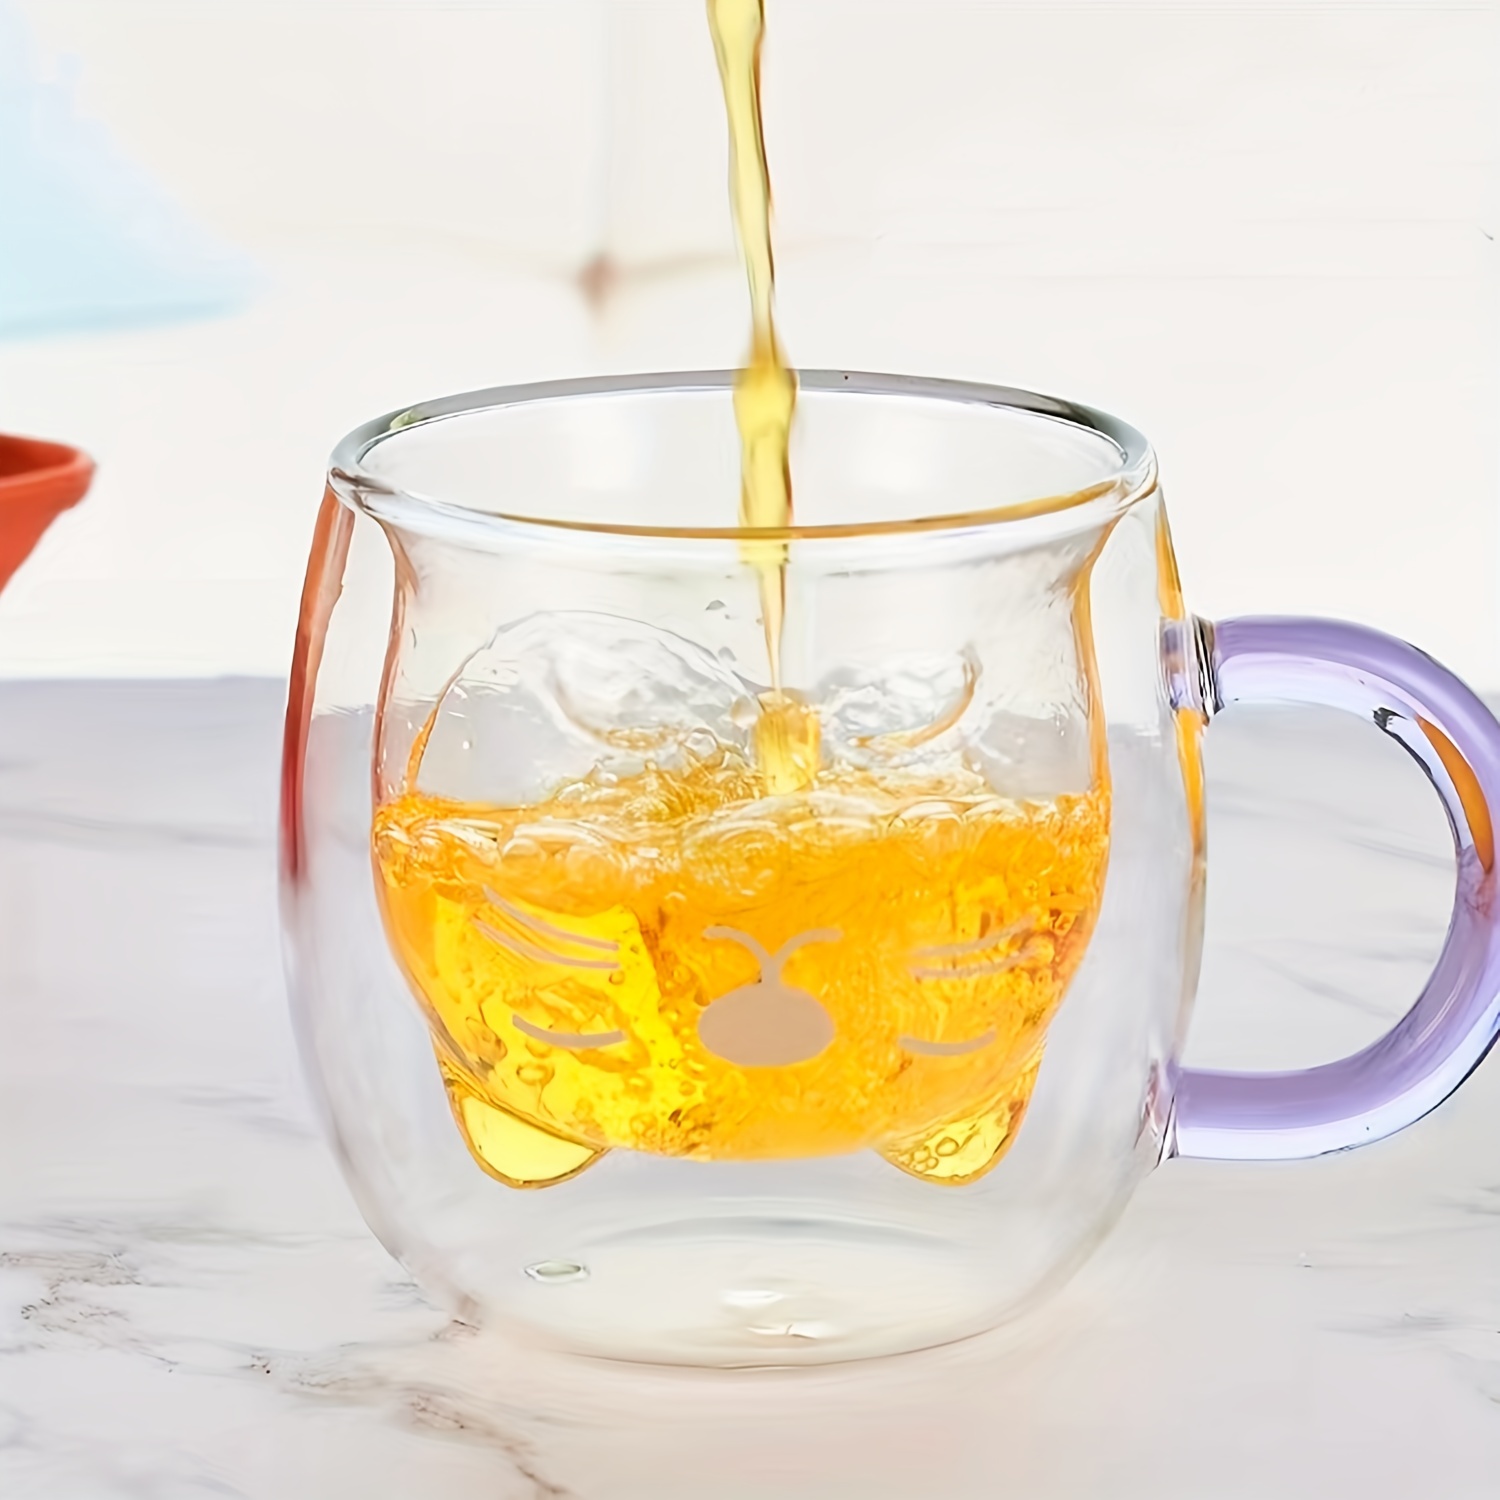 Can Shaped Cups, Beer Cup, Glass Beer Cup, coffee cup, drinking cup2pcs  Glass Drinking Mug Clear Glass Cocktail Mug Heat-resisting Water Cups 